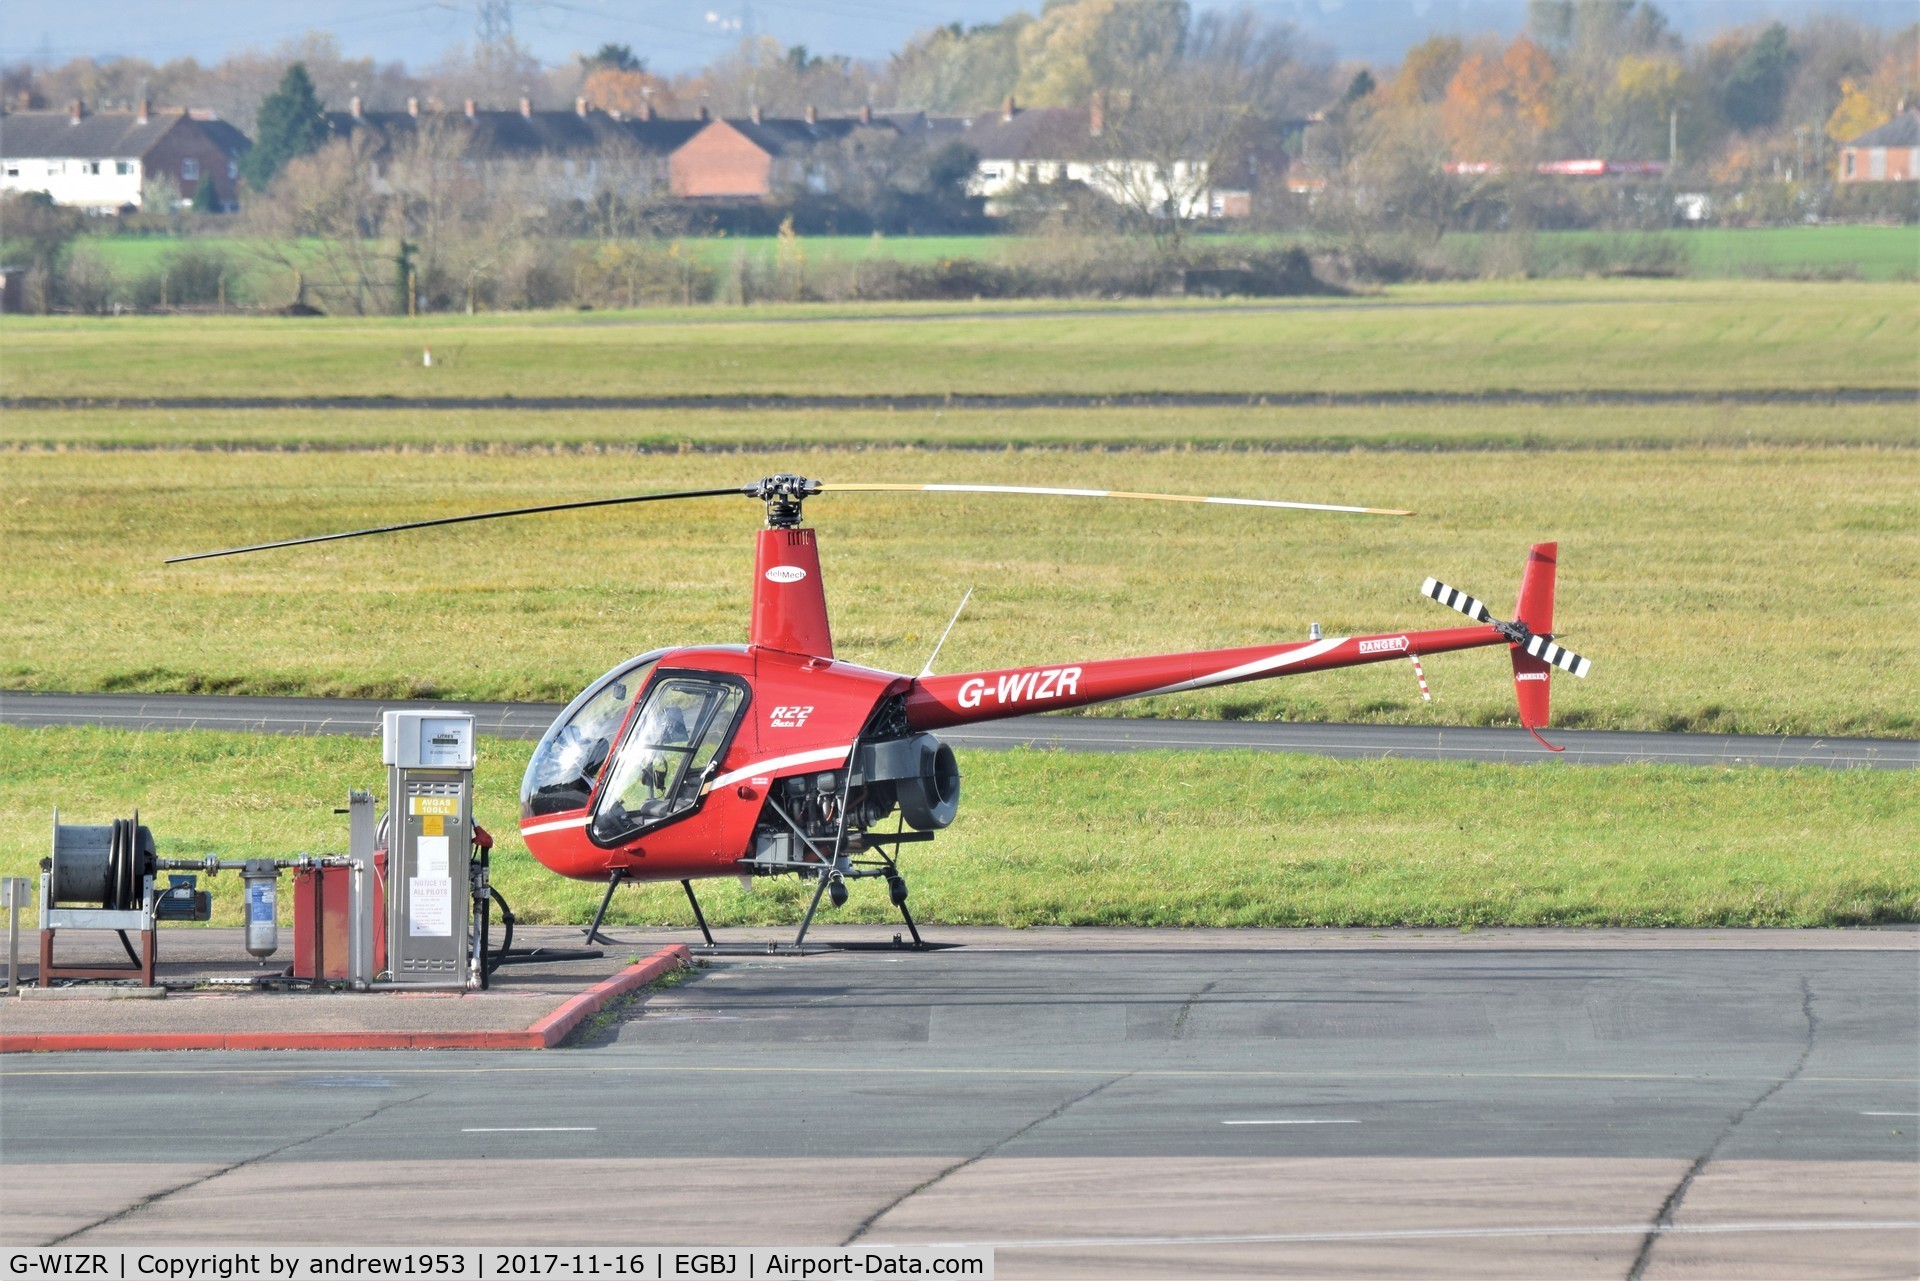 G-WIZR, 1998 Robinson R22 Beta II C/N 2799, G-WIZR at Gloucestershire Airport.